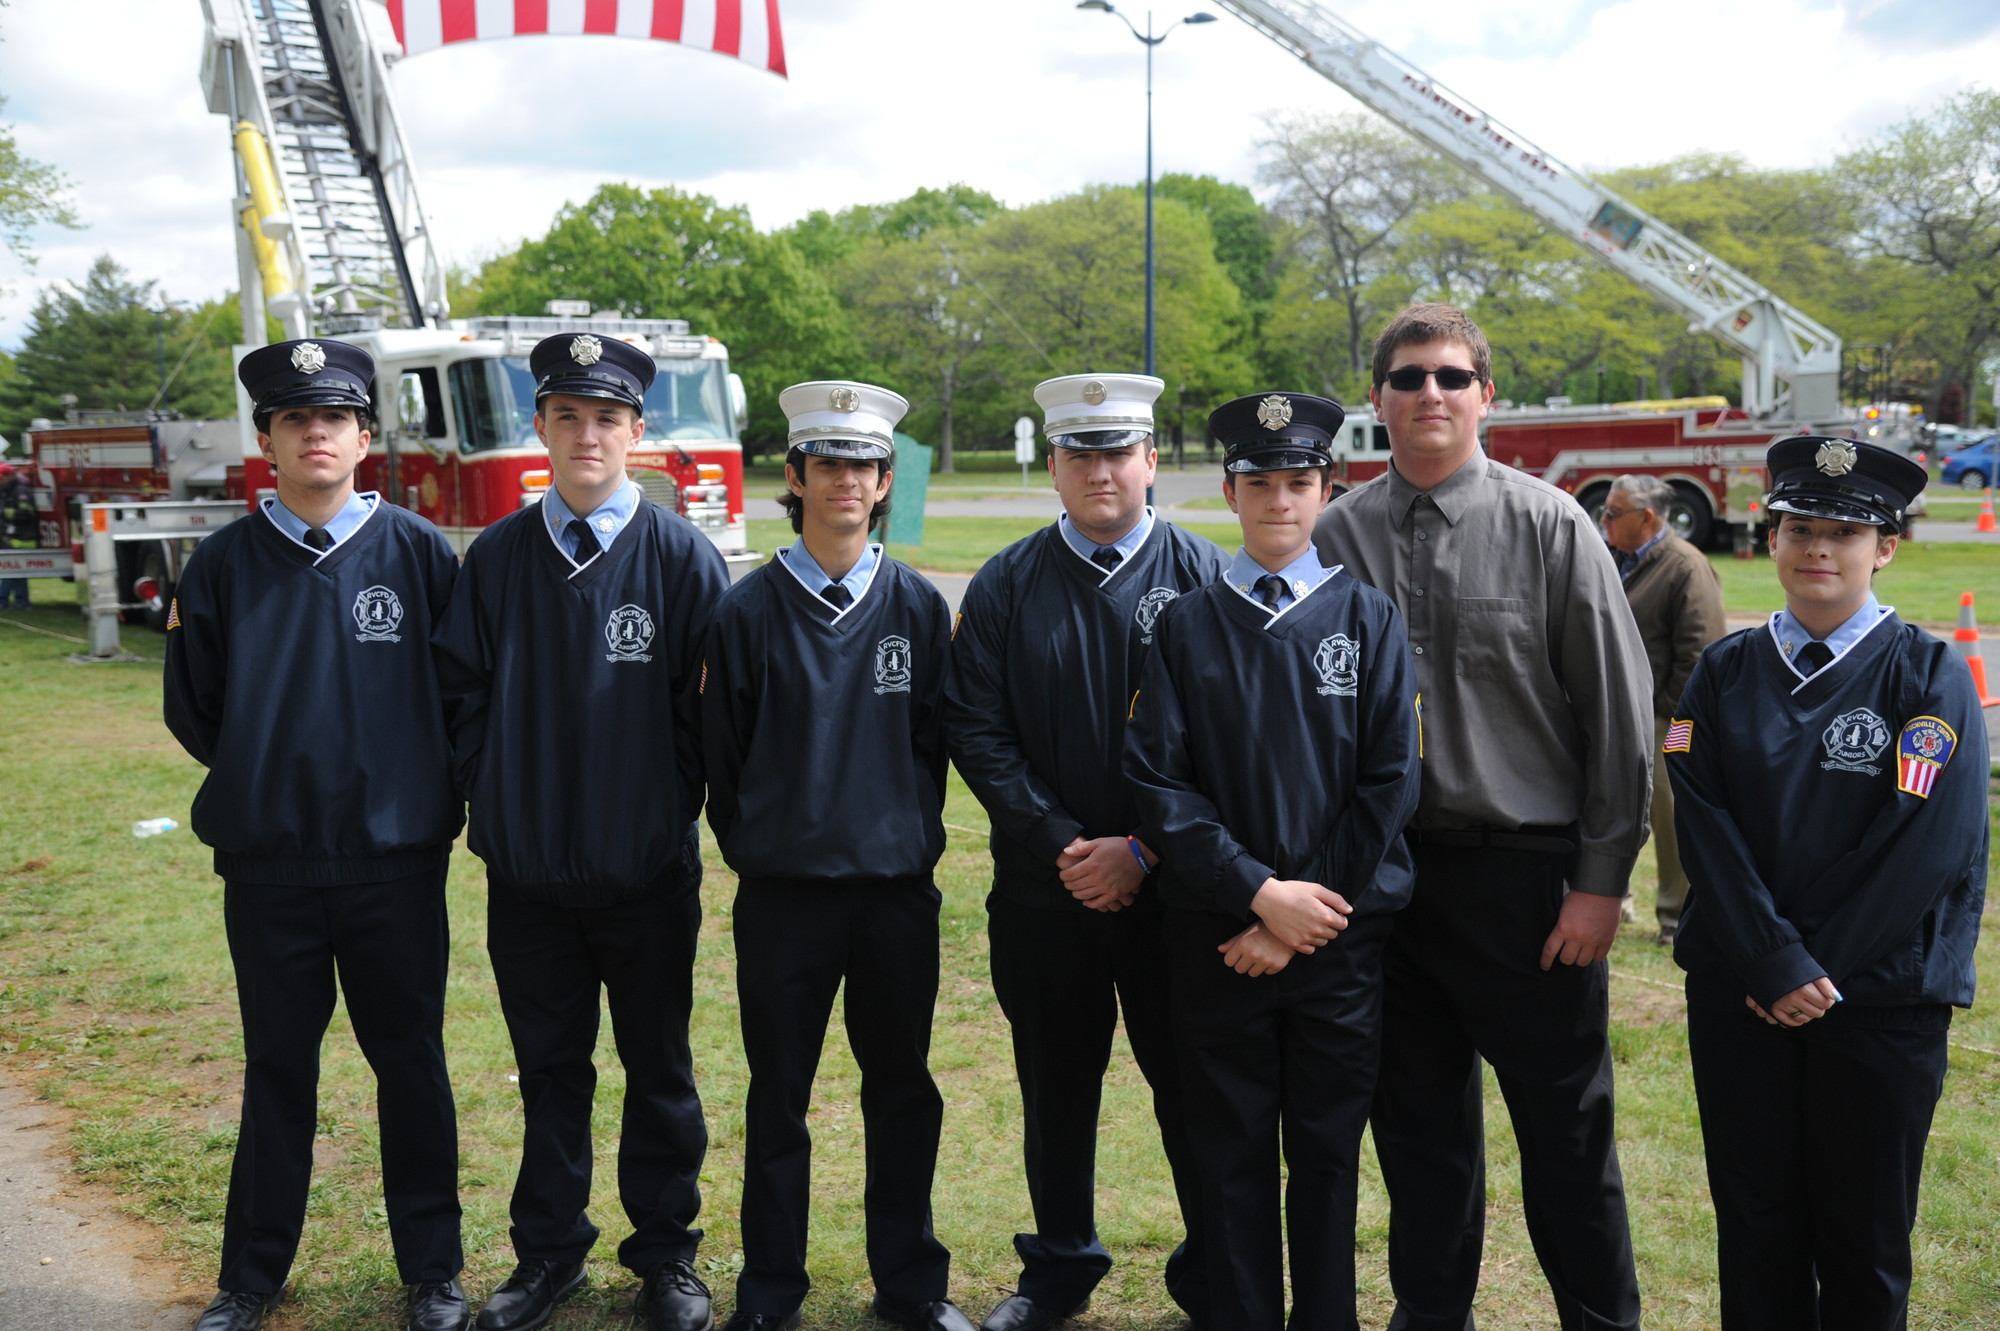 Junior members of the Rockville Centre Fire Department — Ryan Russell, Michael Murphy, John Cook, Pete Gibney, George Barrett, Robert Spaulding and Erika Brancato — came out to see the monument.